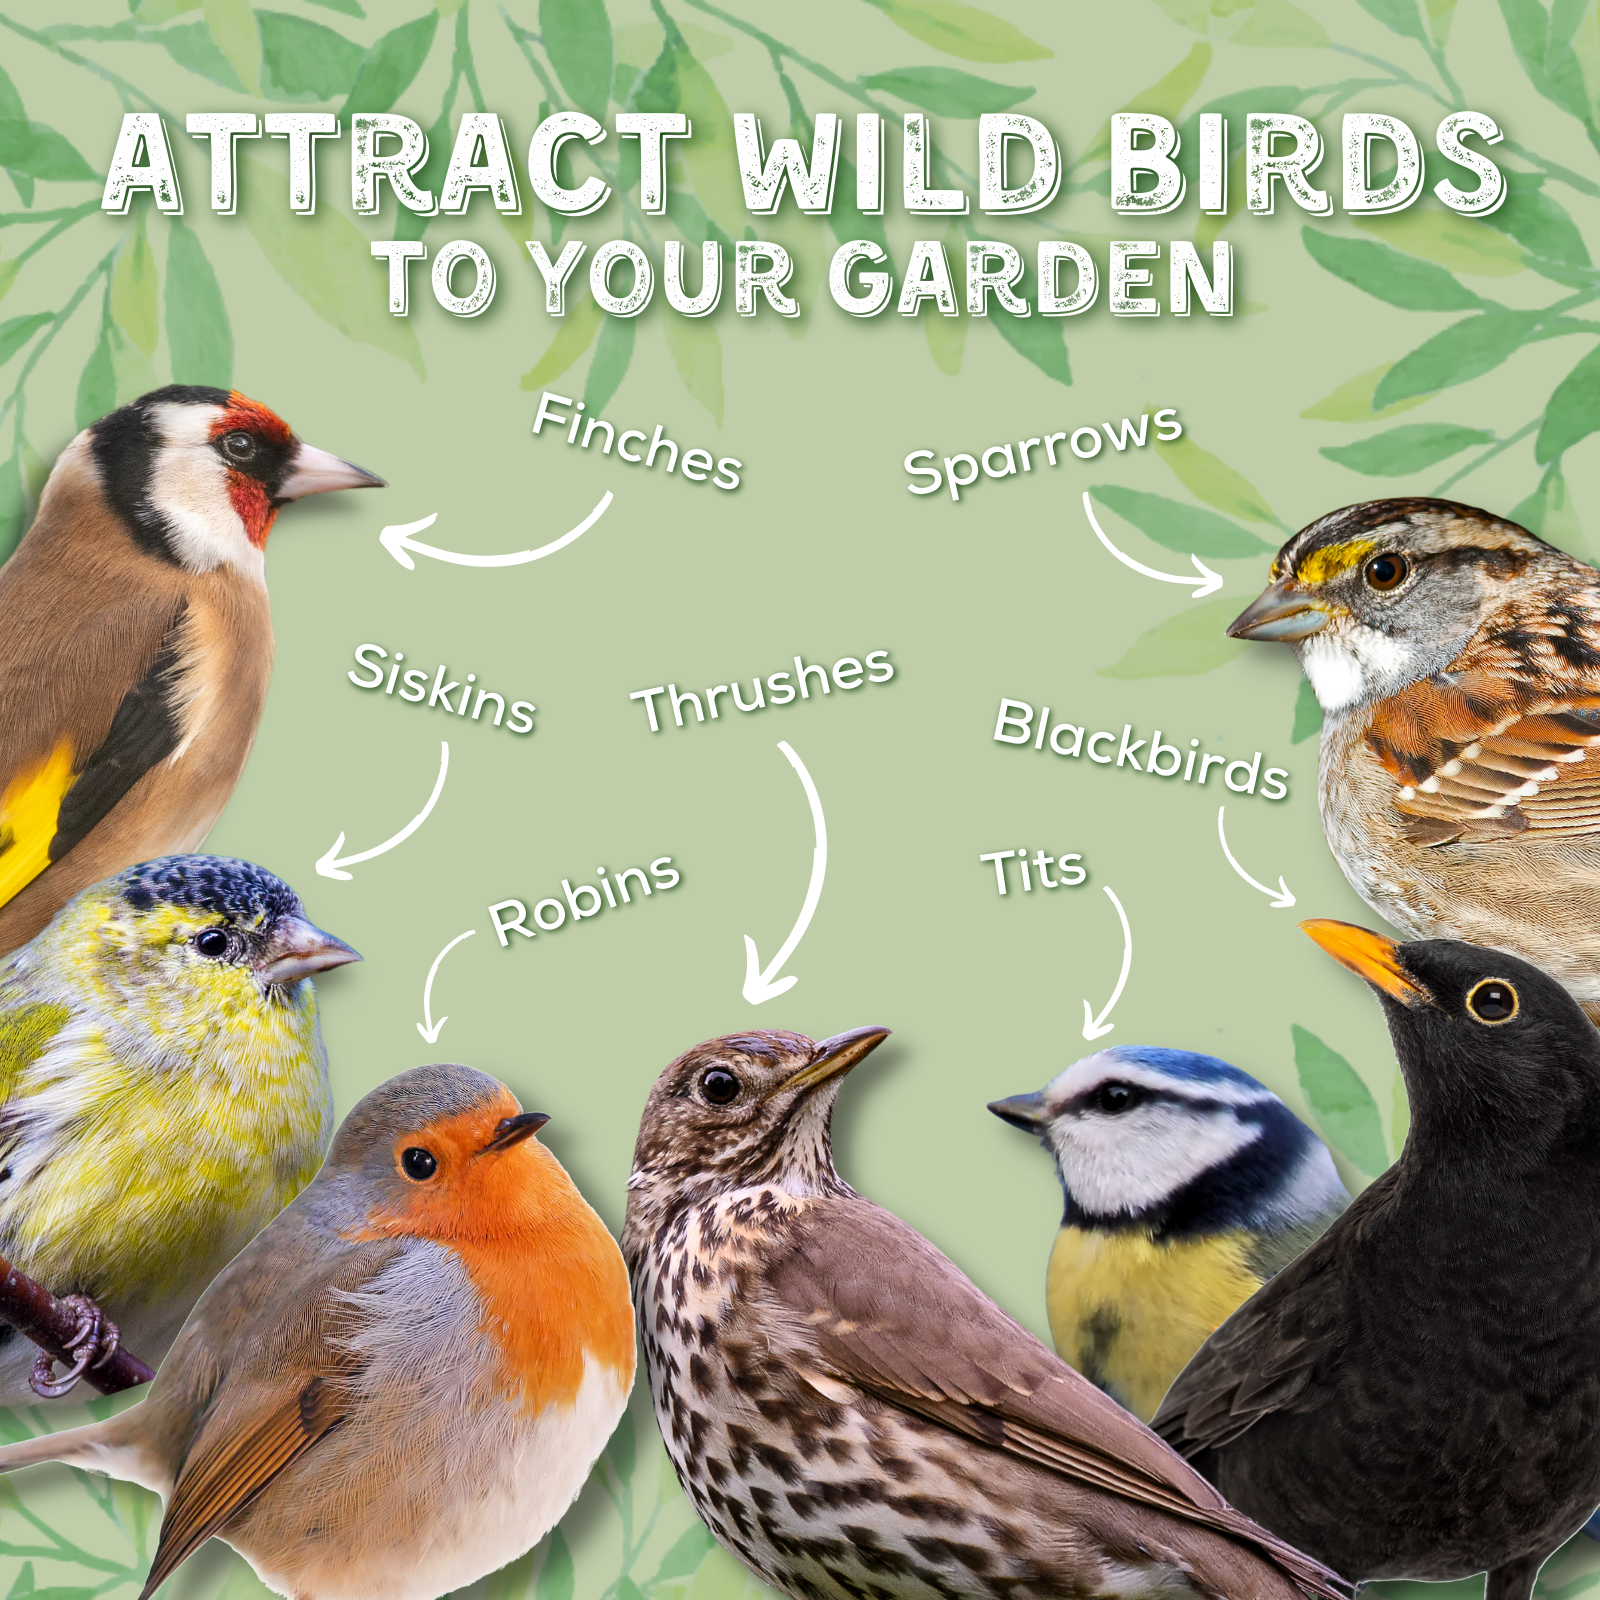 Attract wild birds to your garden: Finches, Sparrows, Siskins, Thrushes, Blackbirds, Robins, Tits